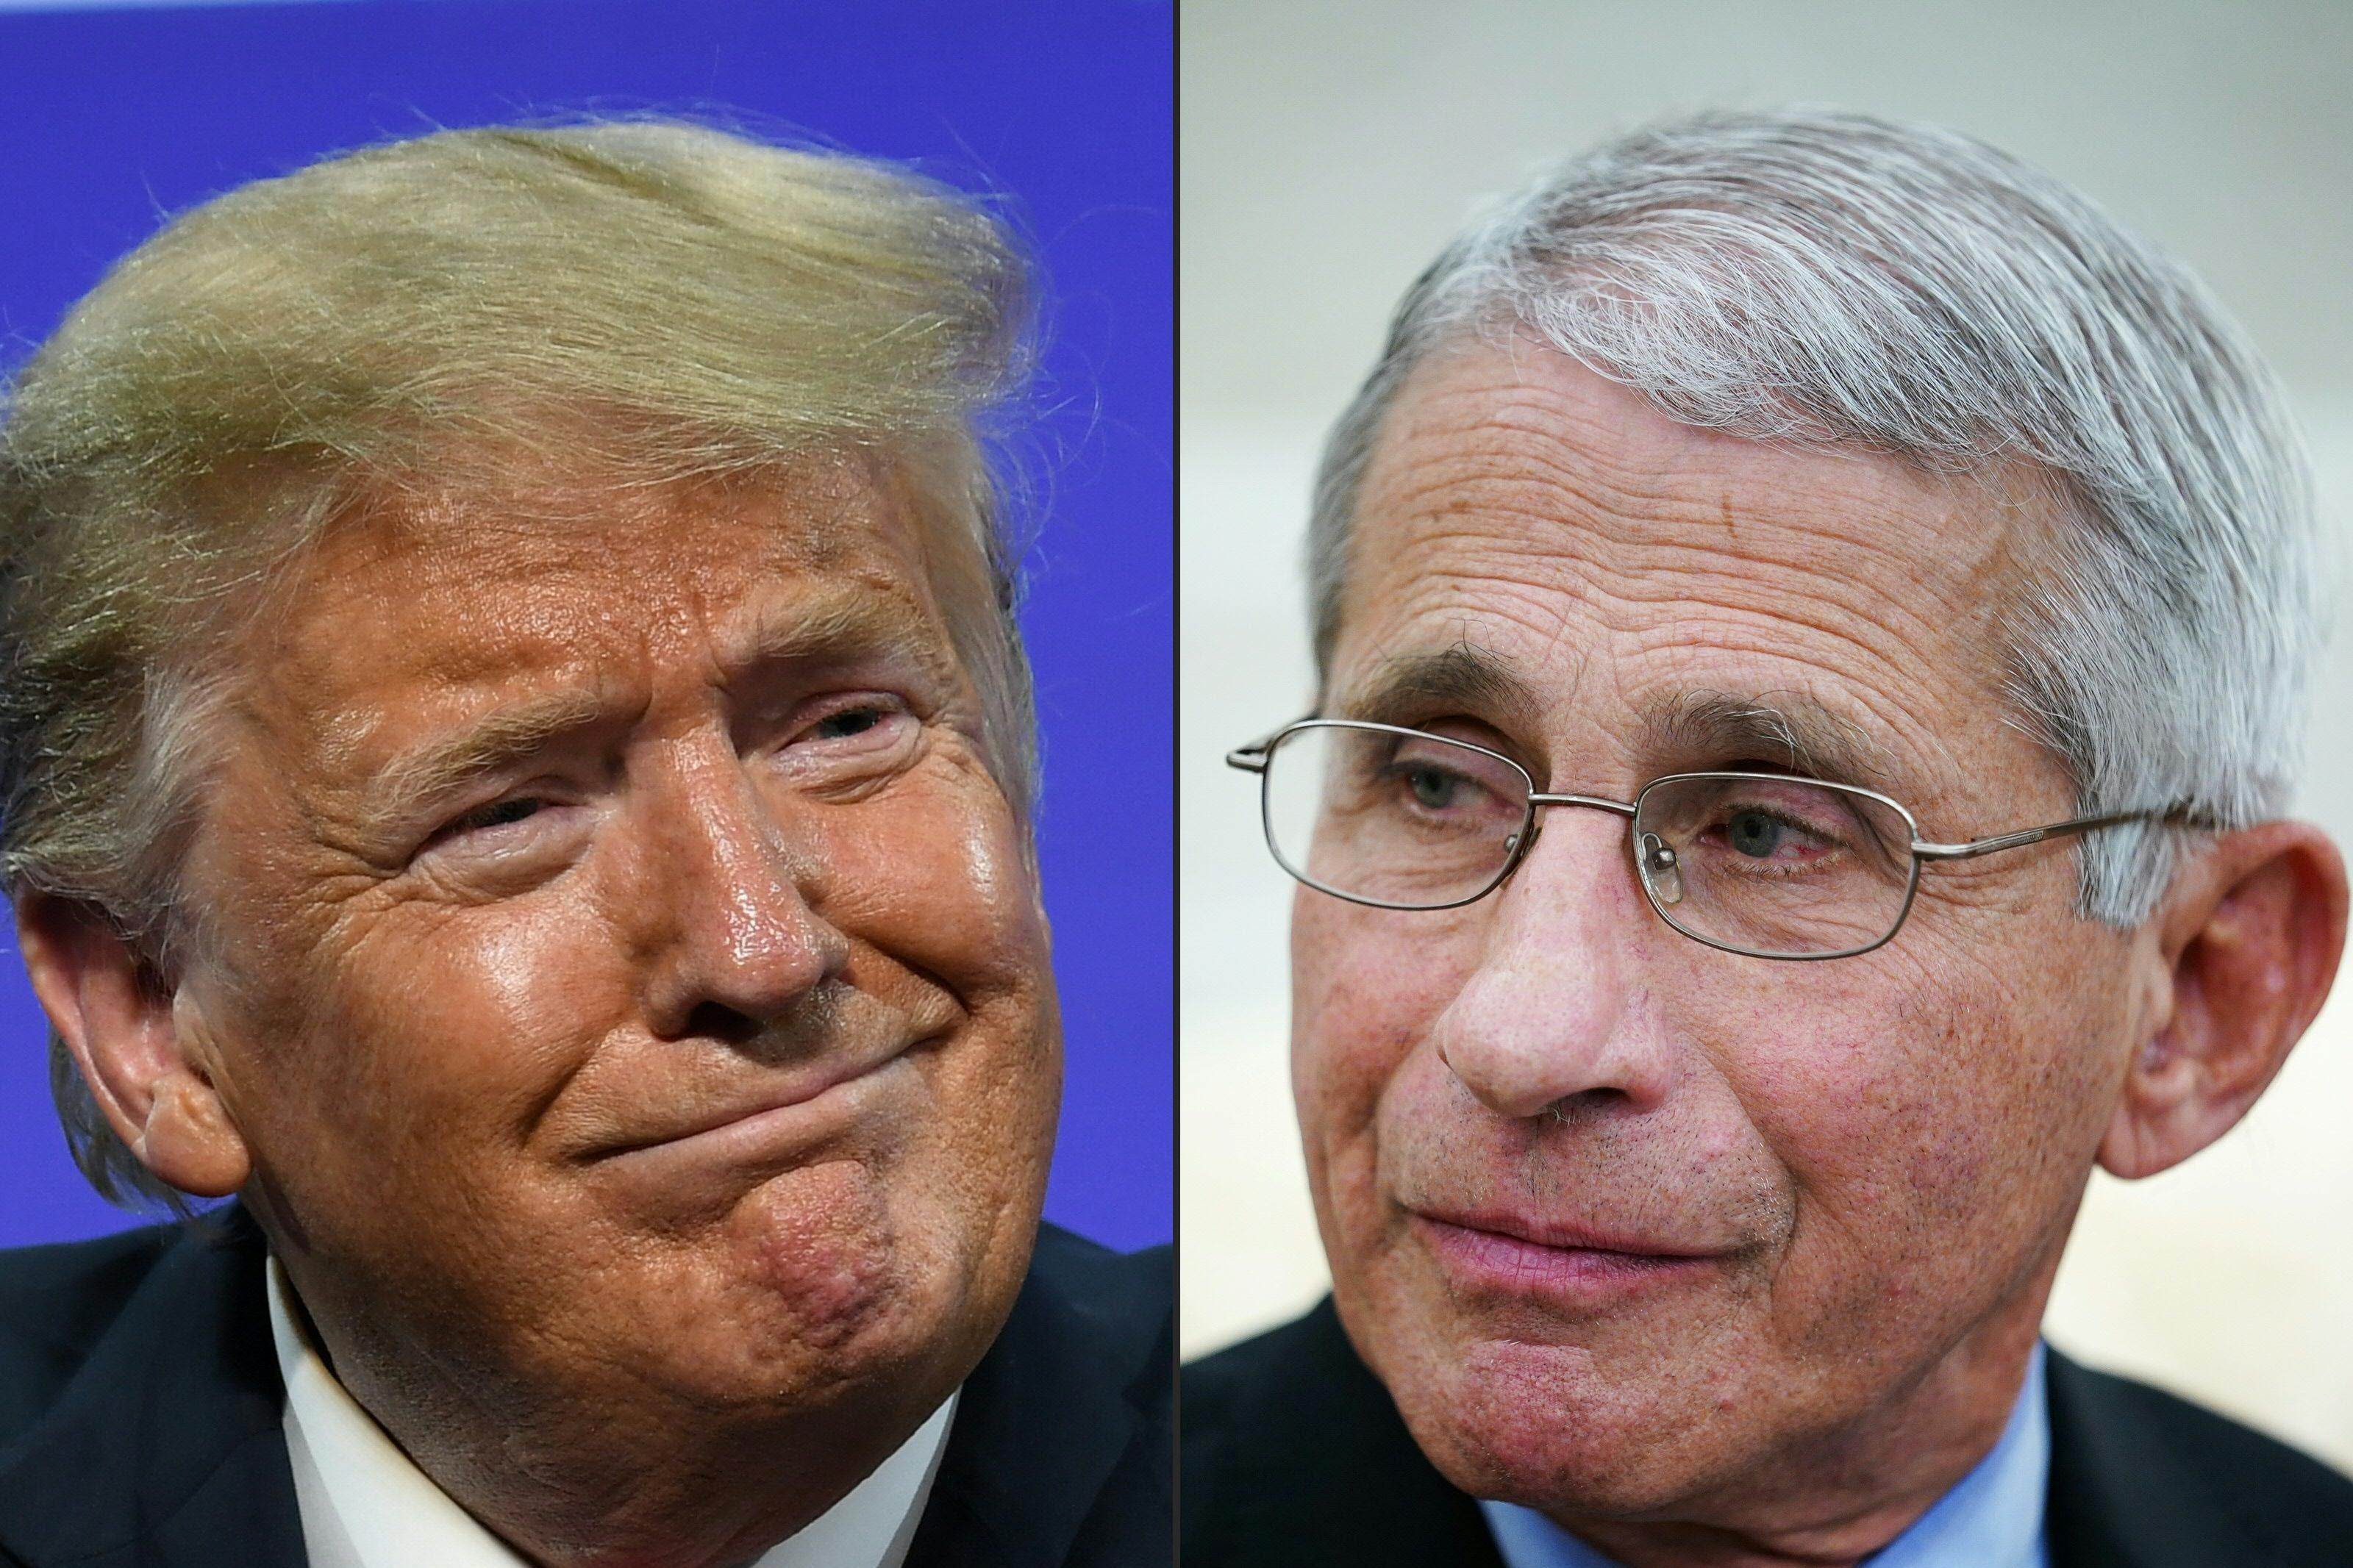 This combination of pictures created on July 13, 2020 shows President Donald Trump in Phoenix, Arizona, June 23, 2020 and Anthony Fauci , director of the National Institute of Allergy and Infectious Diseases, in Washington, DC on April 29, 2020. 